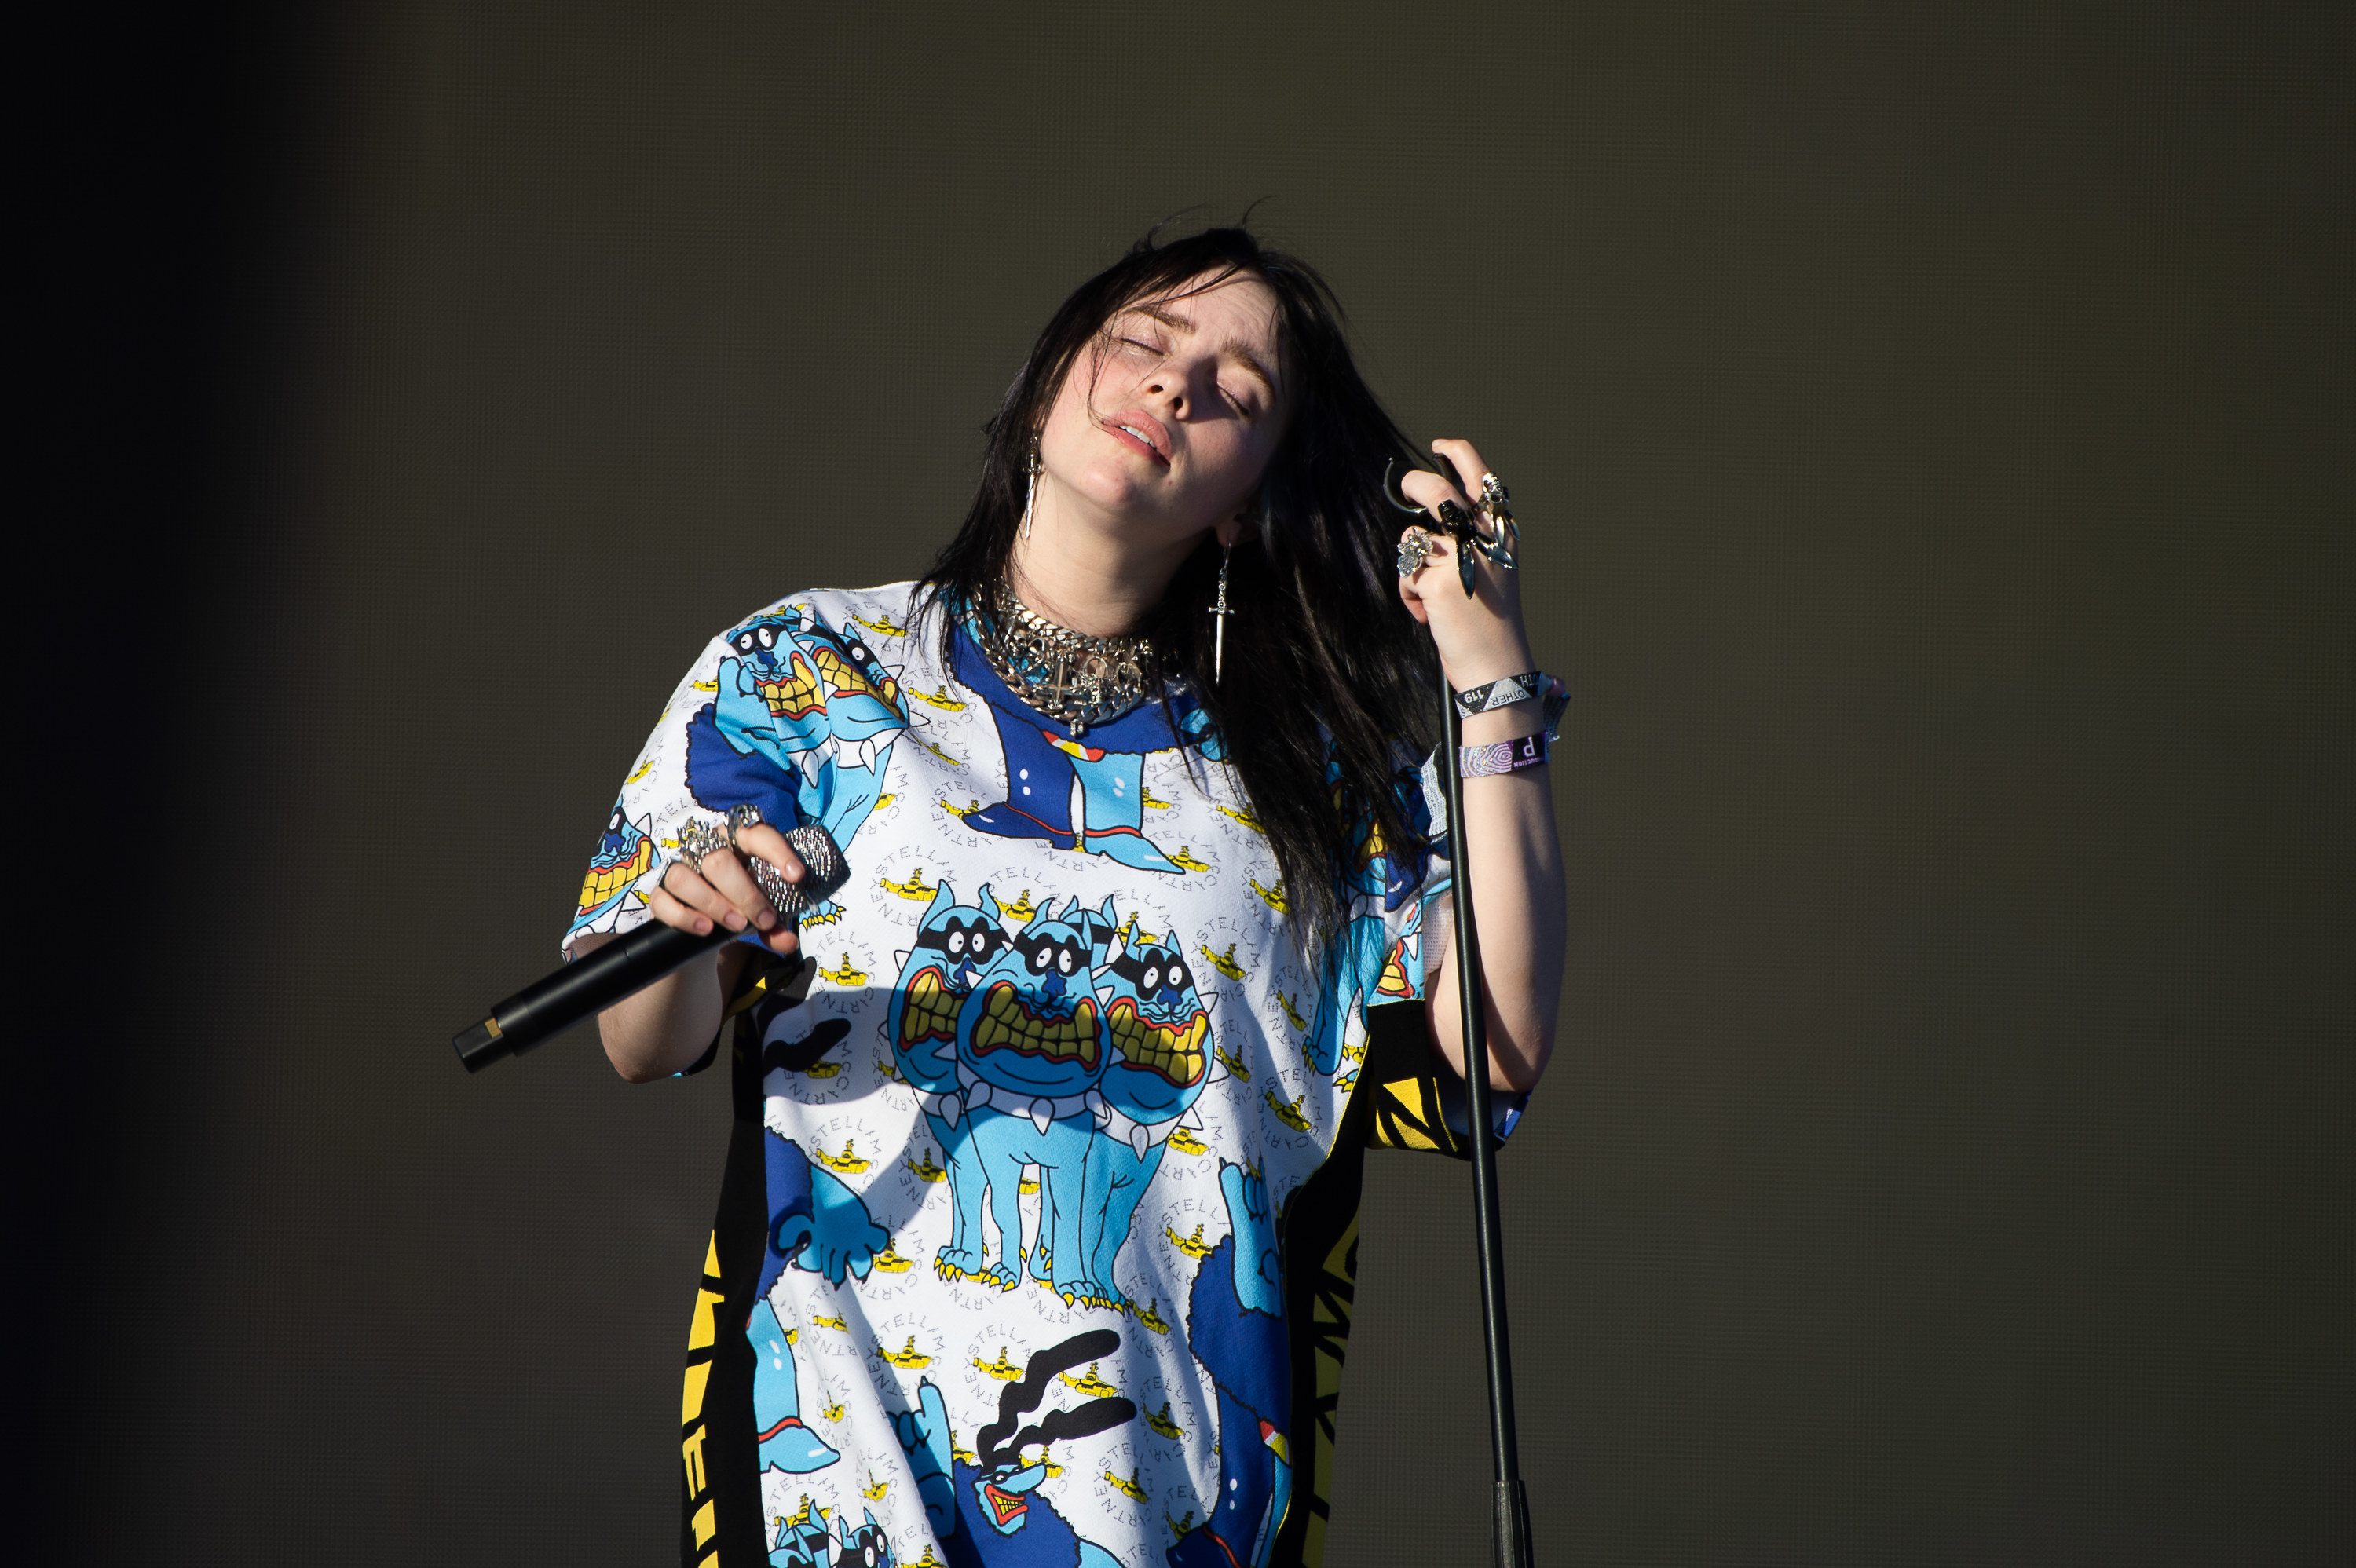 Billie performing onstage with her eyes closed and her hands on two microphones